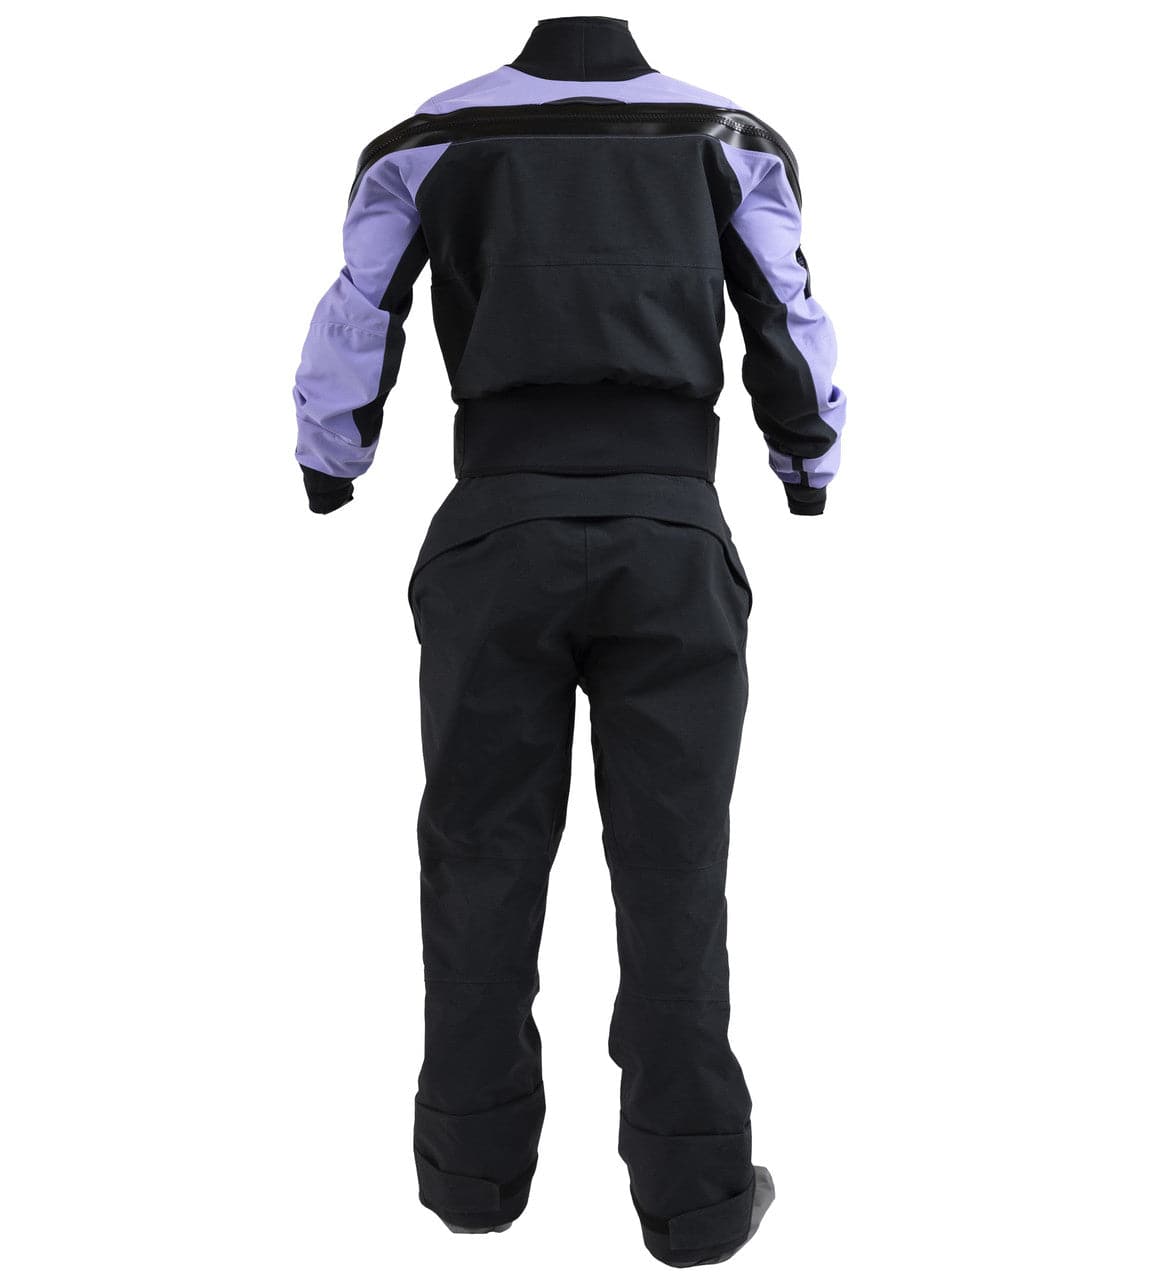 Featuring the Icon GORE-TEX Pro Drysuit - Women's women's dry wear manufactured by Kokatat shown here from a fourth angle.